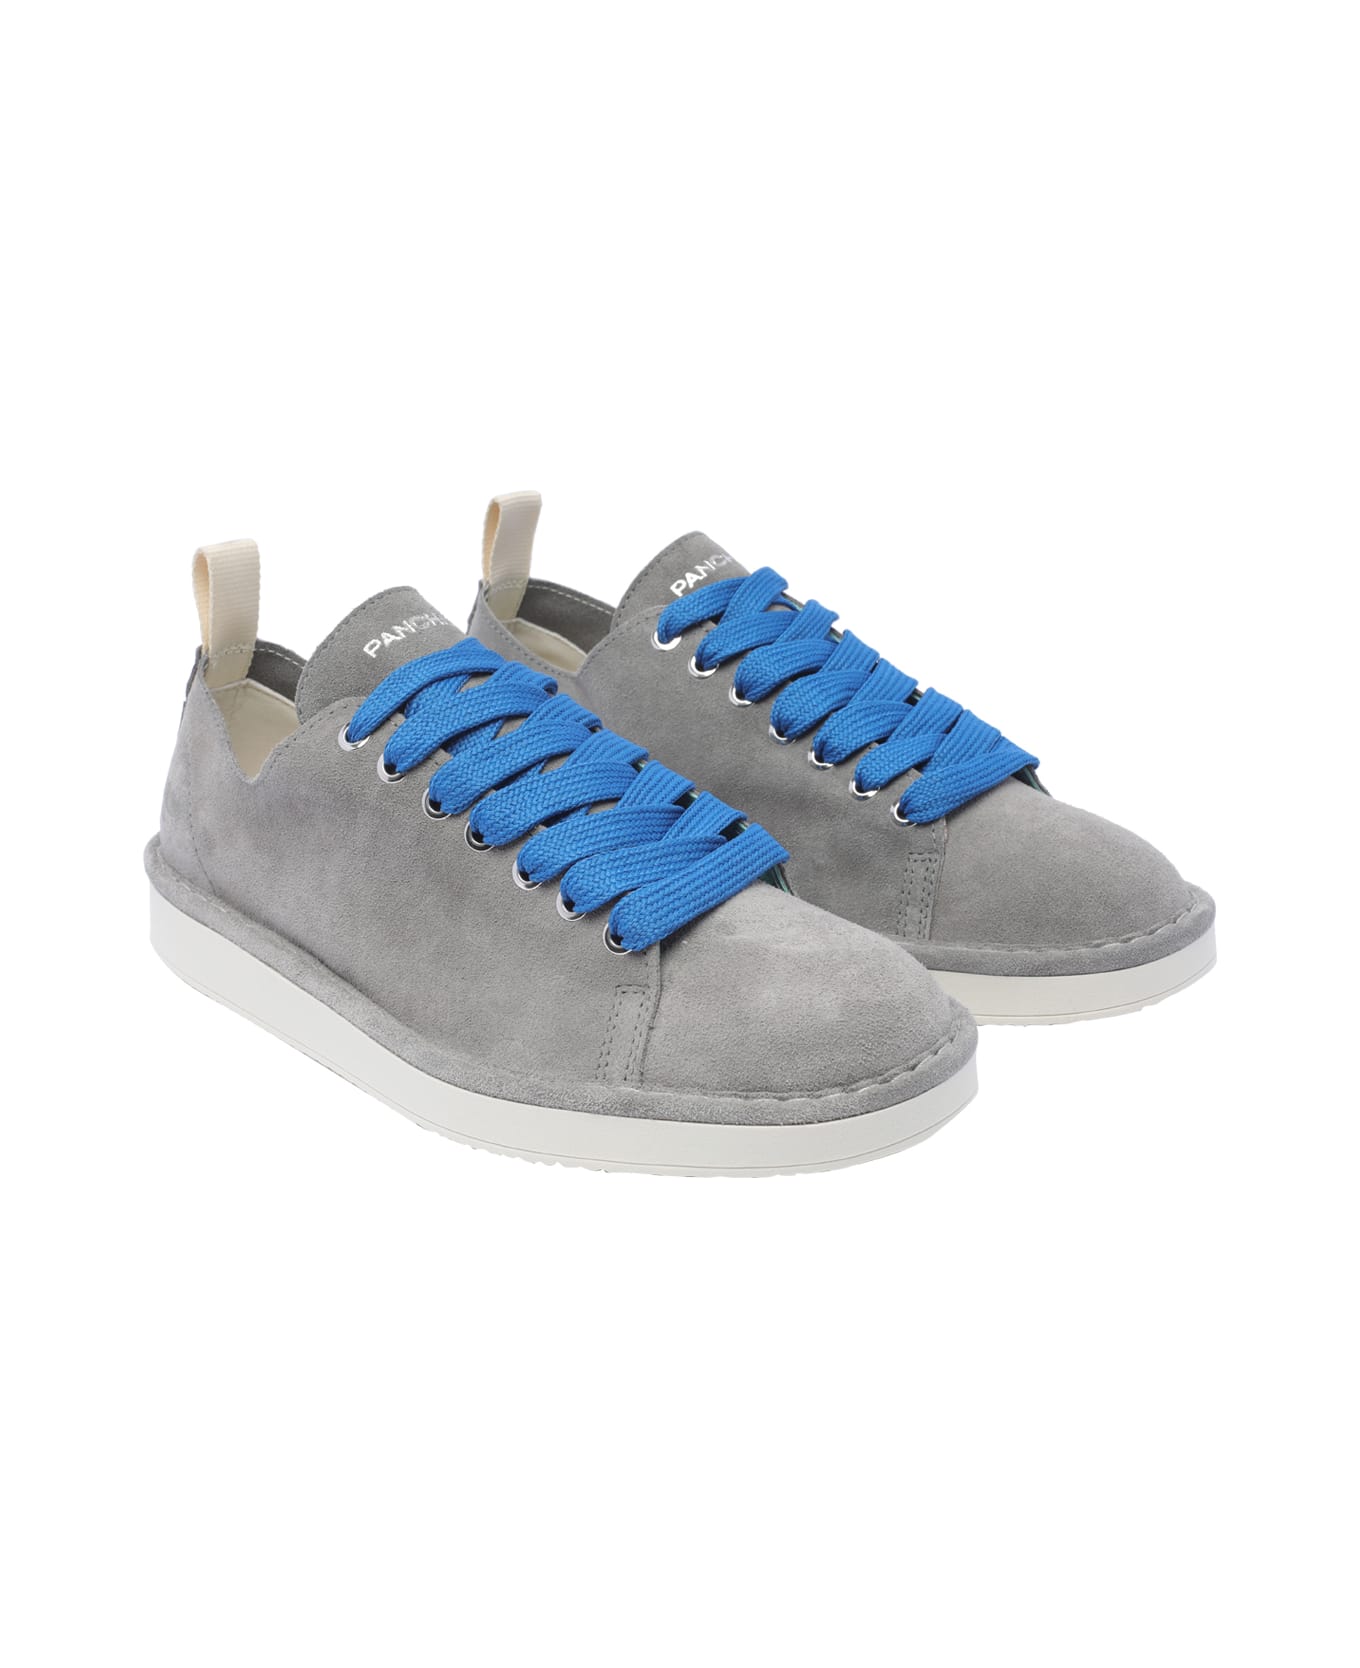 Panchic Laced-up Shoes P01 - Grey